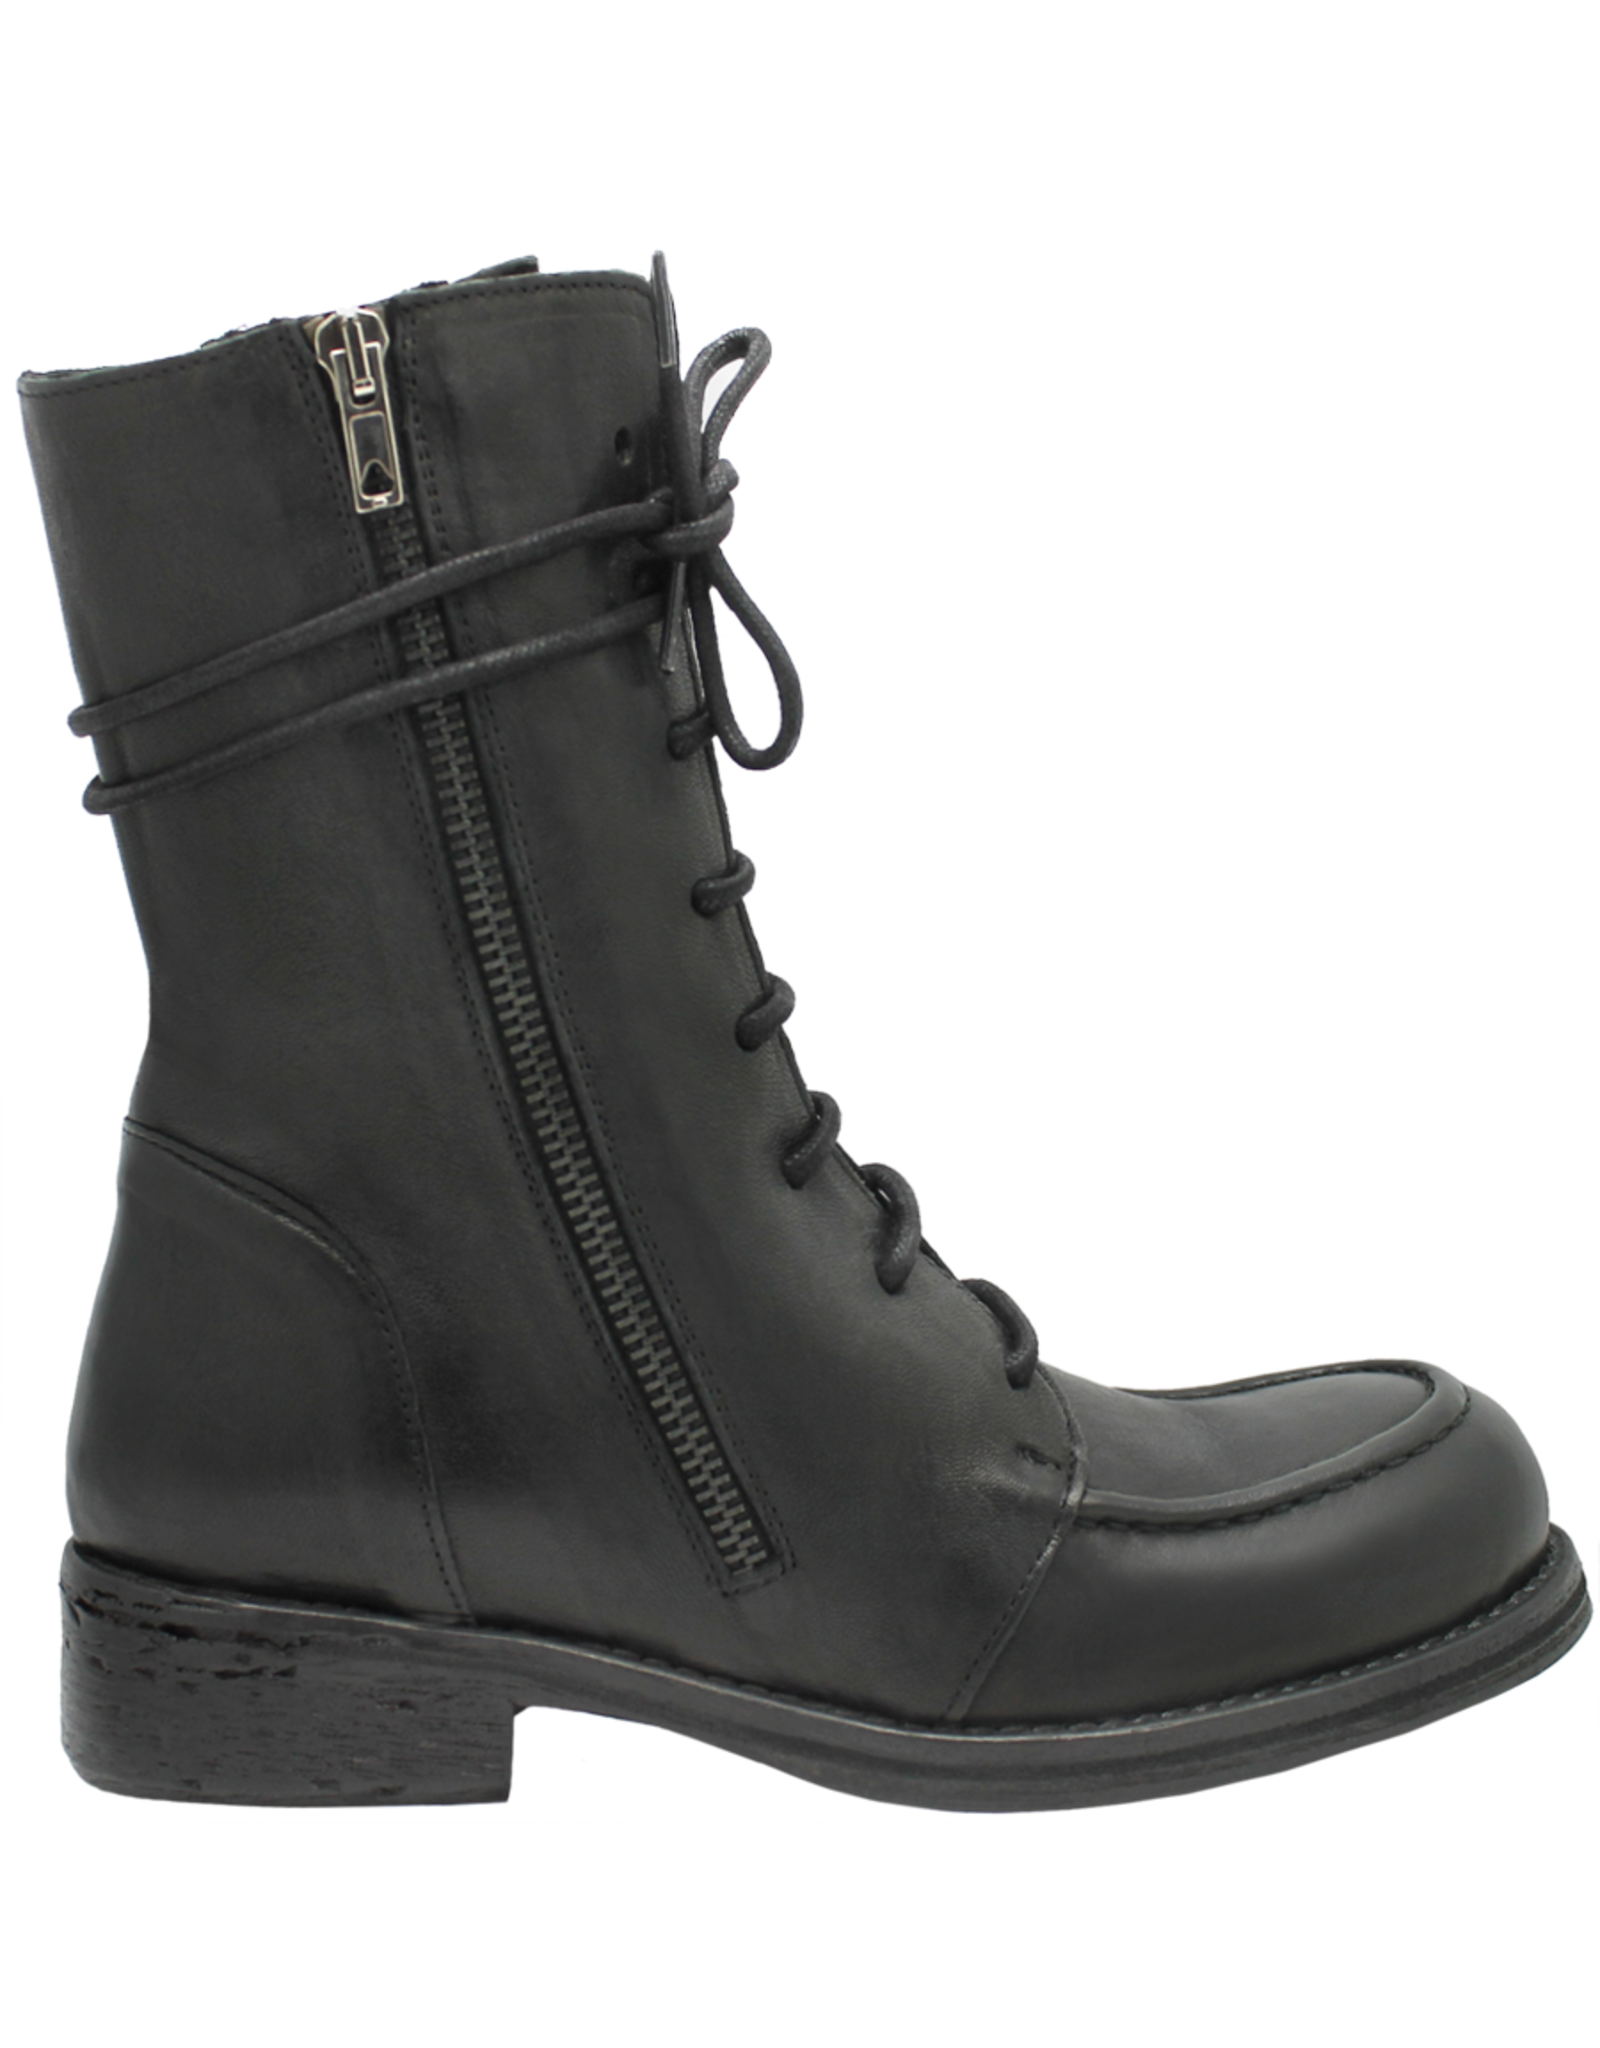 Studio Studio SO1G Black Flat Mid-Calf Boot With Laces/ ZipperDetail 2830